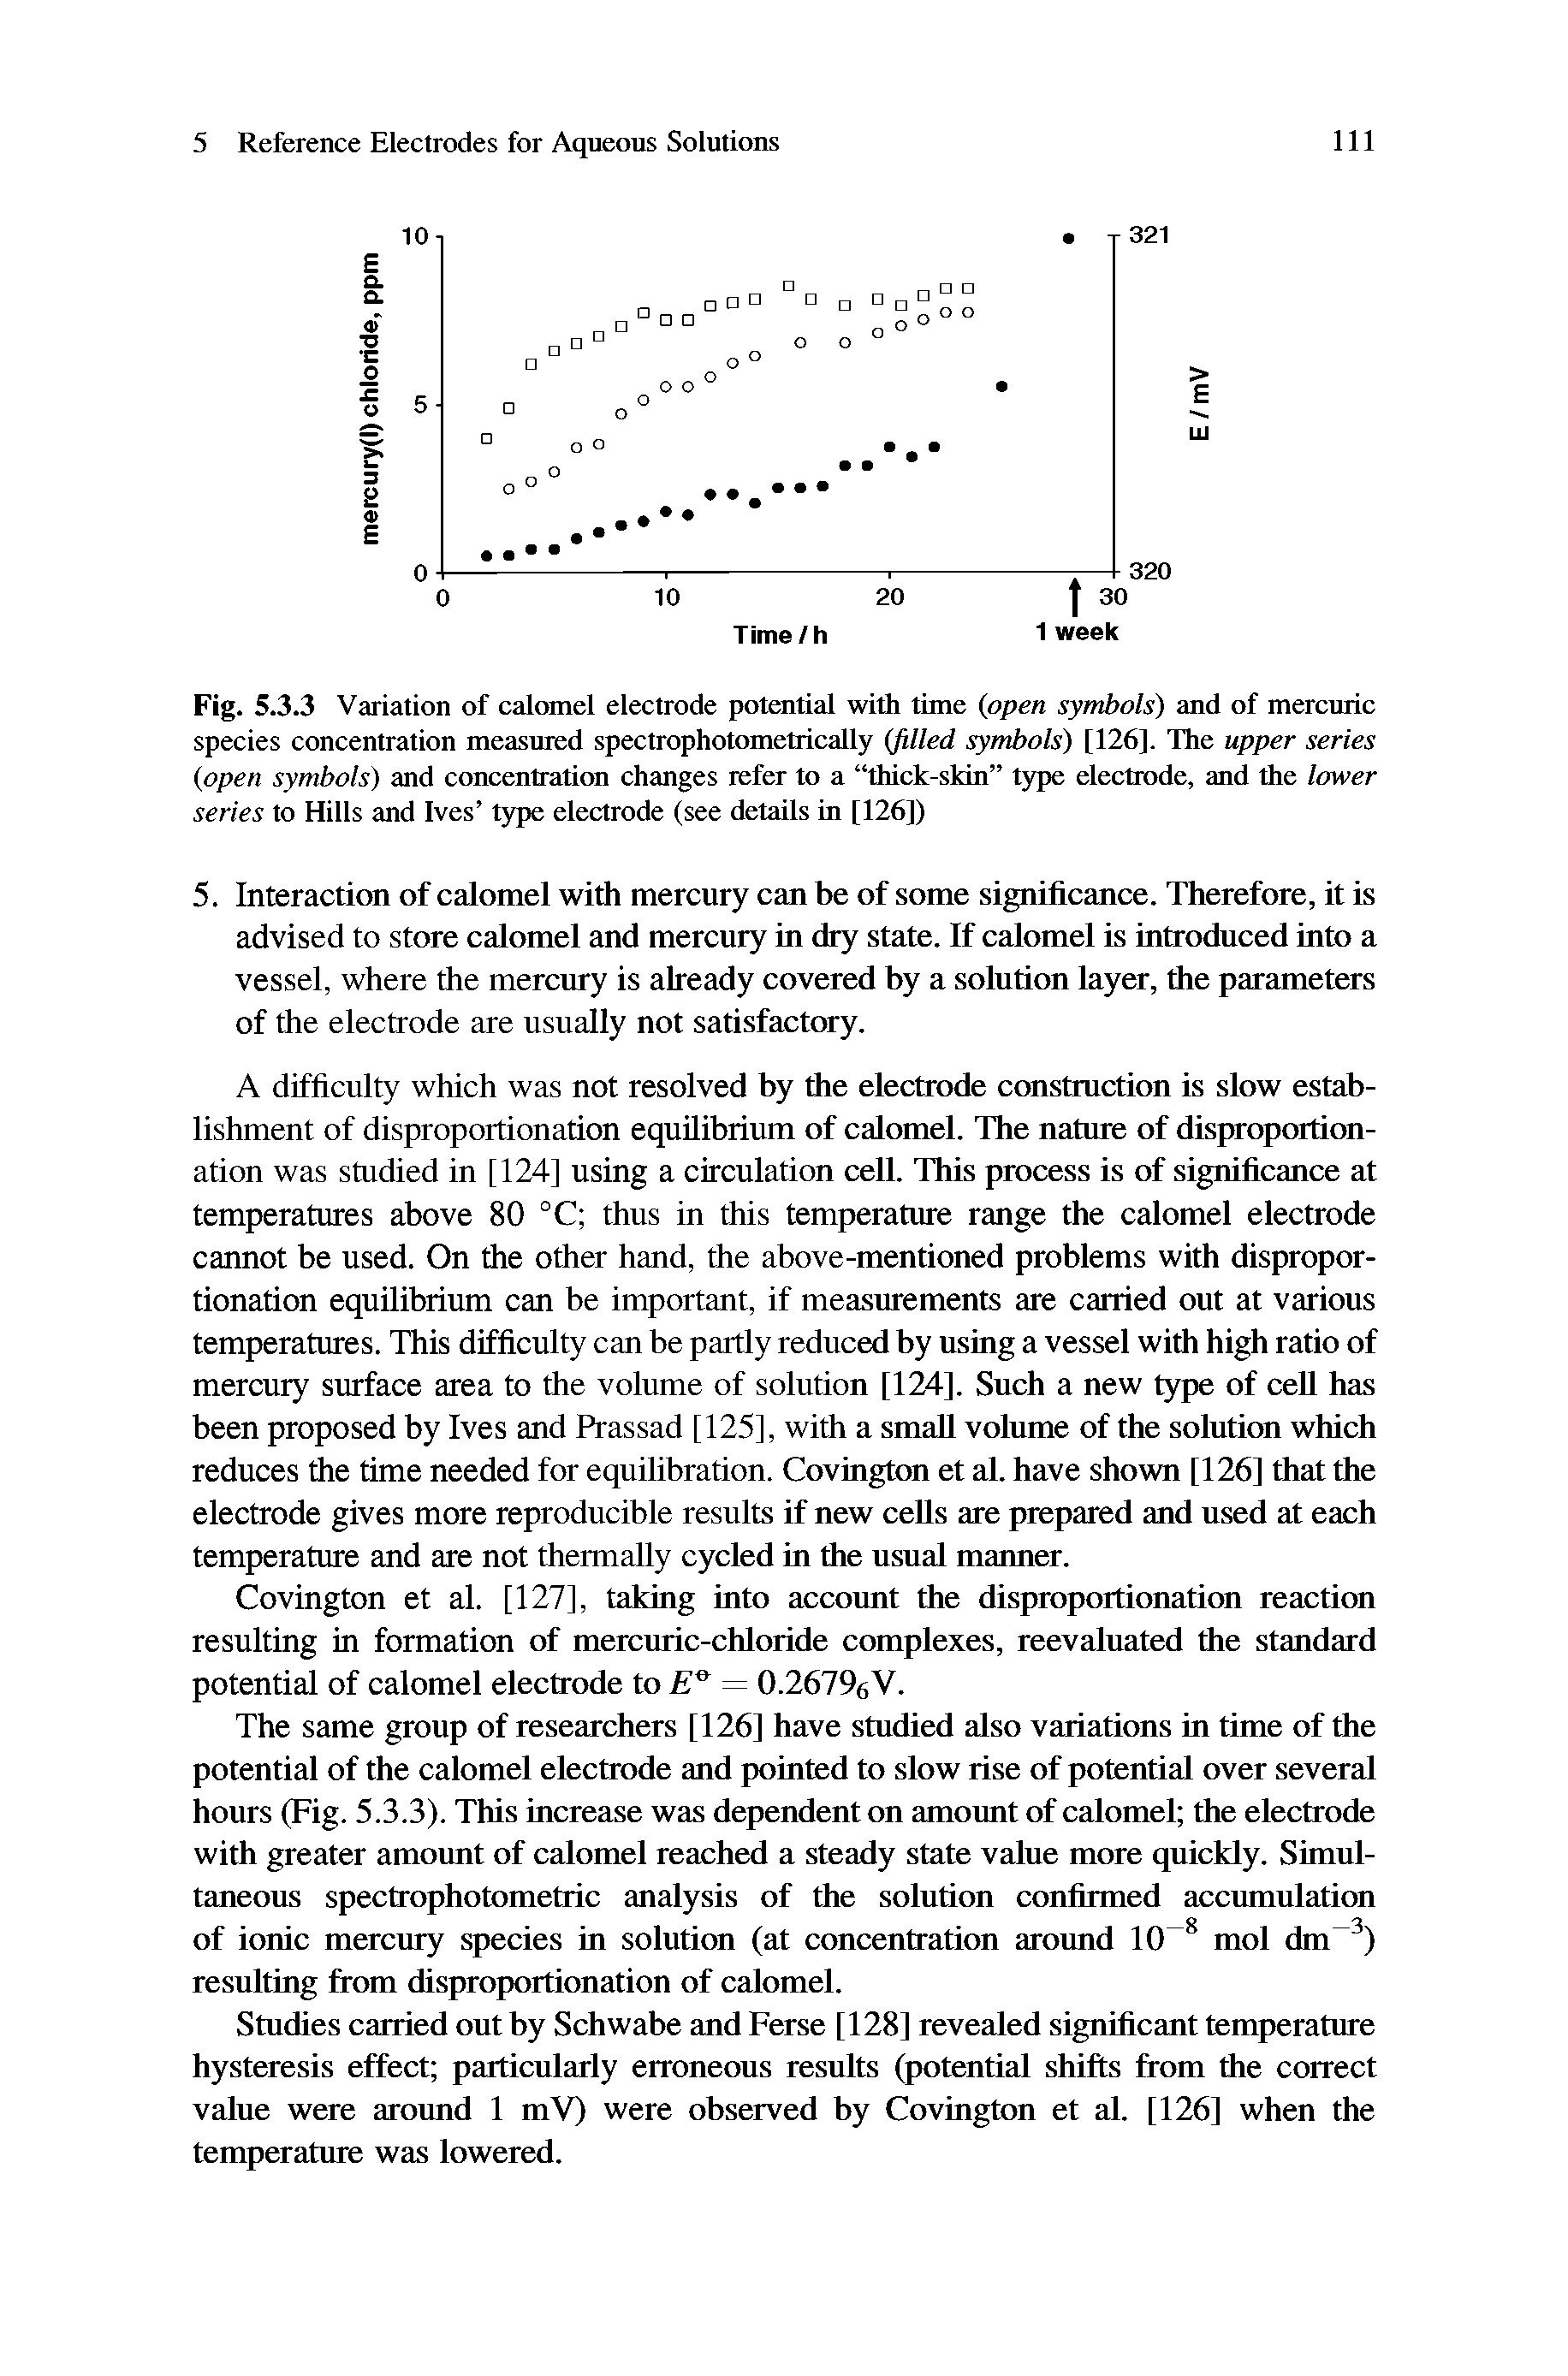 Fig. 5.3.3 Variation of calomel electrode potential with time (open symbols) and of mercuric species concentration measured spectrophotometrically (filled symbols) [126]. The upper series (open symbols) and concentration changes refer to a thick-skin type electrode, and the lower series to Hills and Ives type electrode (see details in [126])...